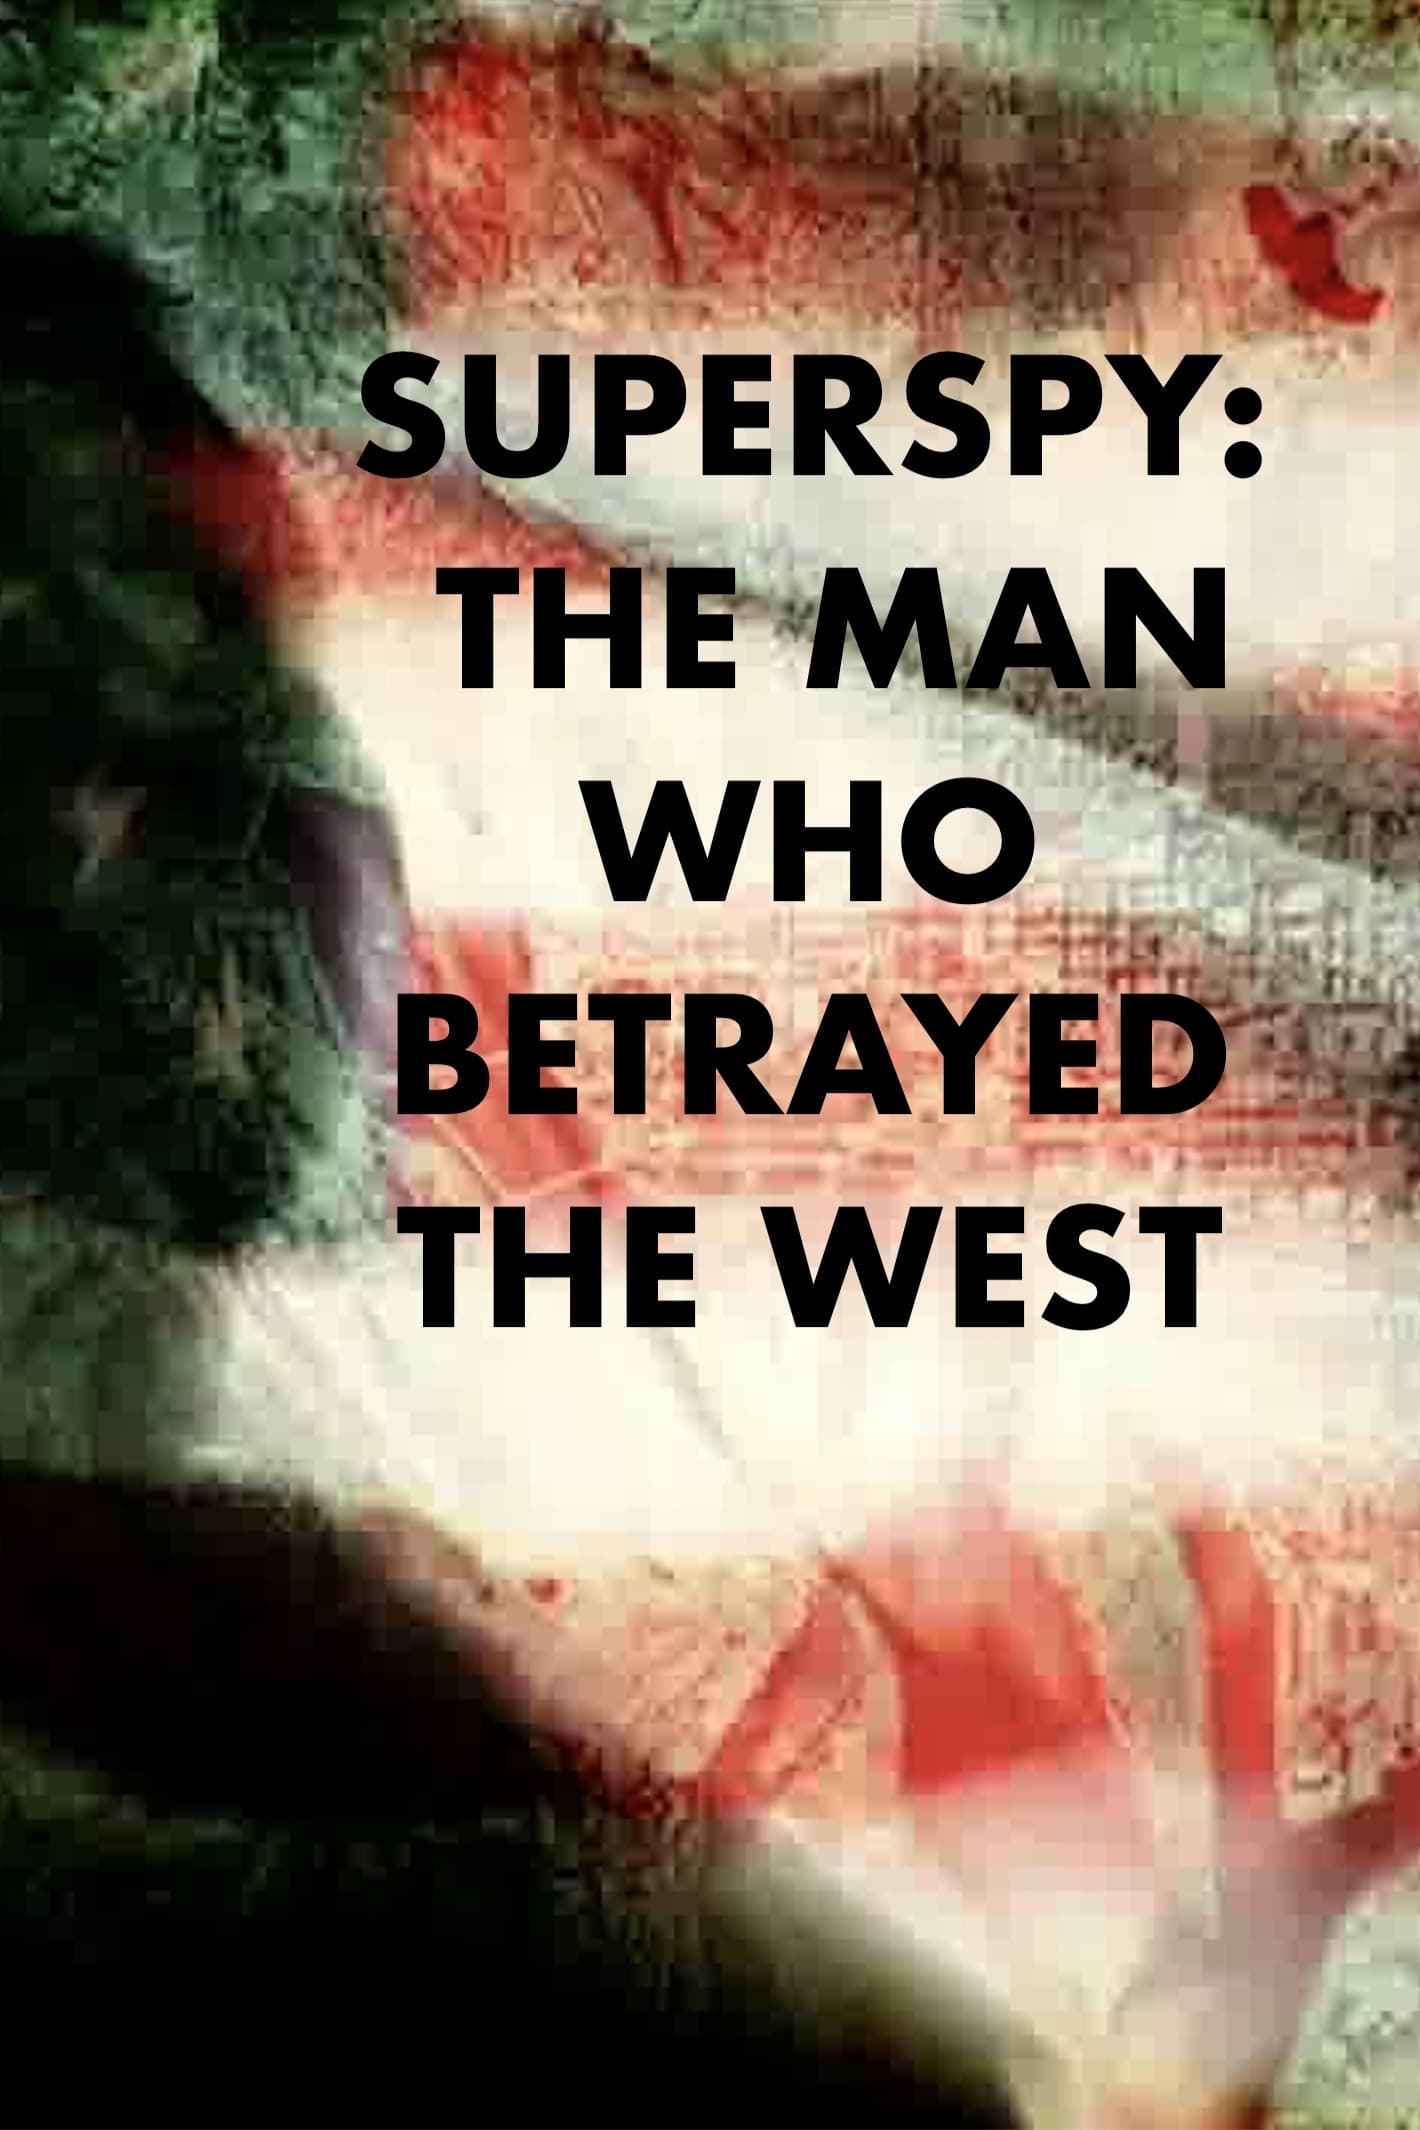 Superspy: The Man Who Betrayed the West